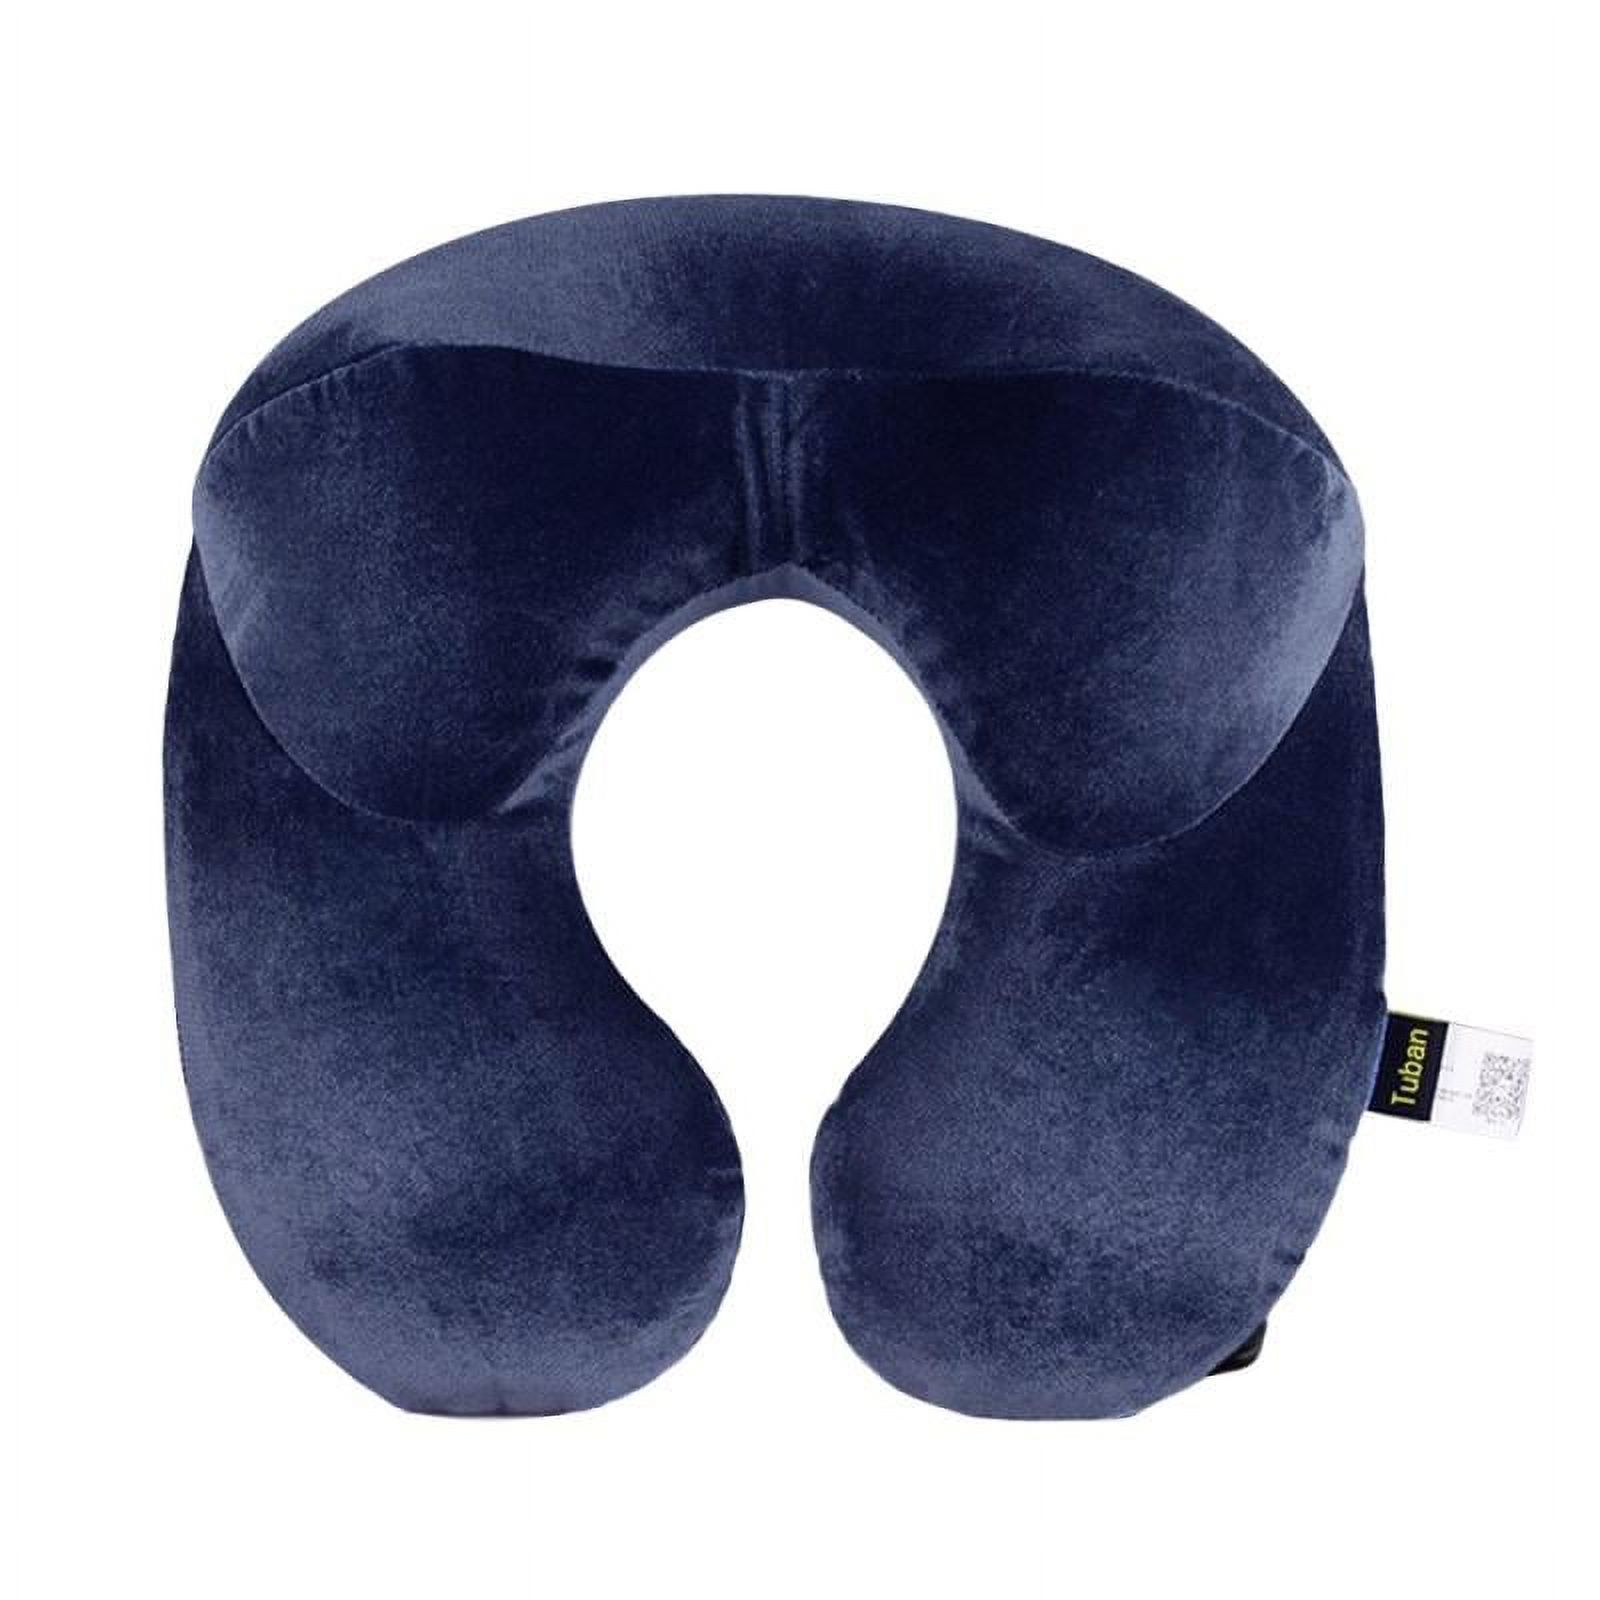 U-Shape Travel Pillow for Airplane Inflatable Neck Pillow Travel Accessories 4 Colors Comfortable Pillows for Sleep Home Textile - image 2 of 6